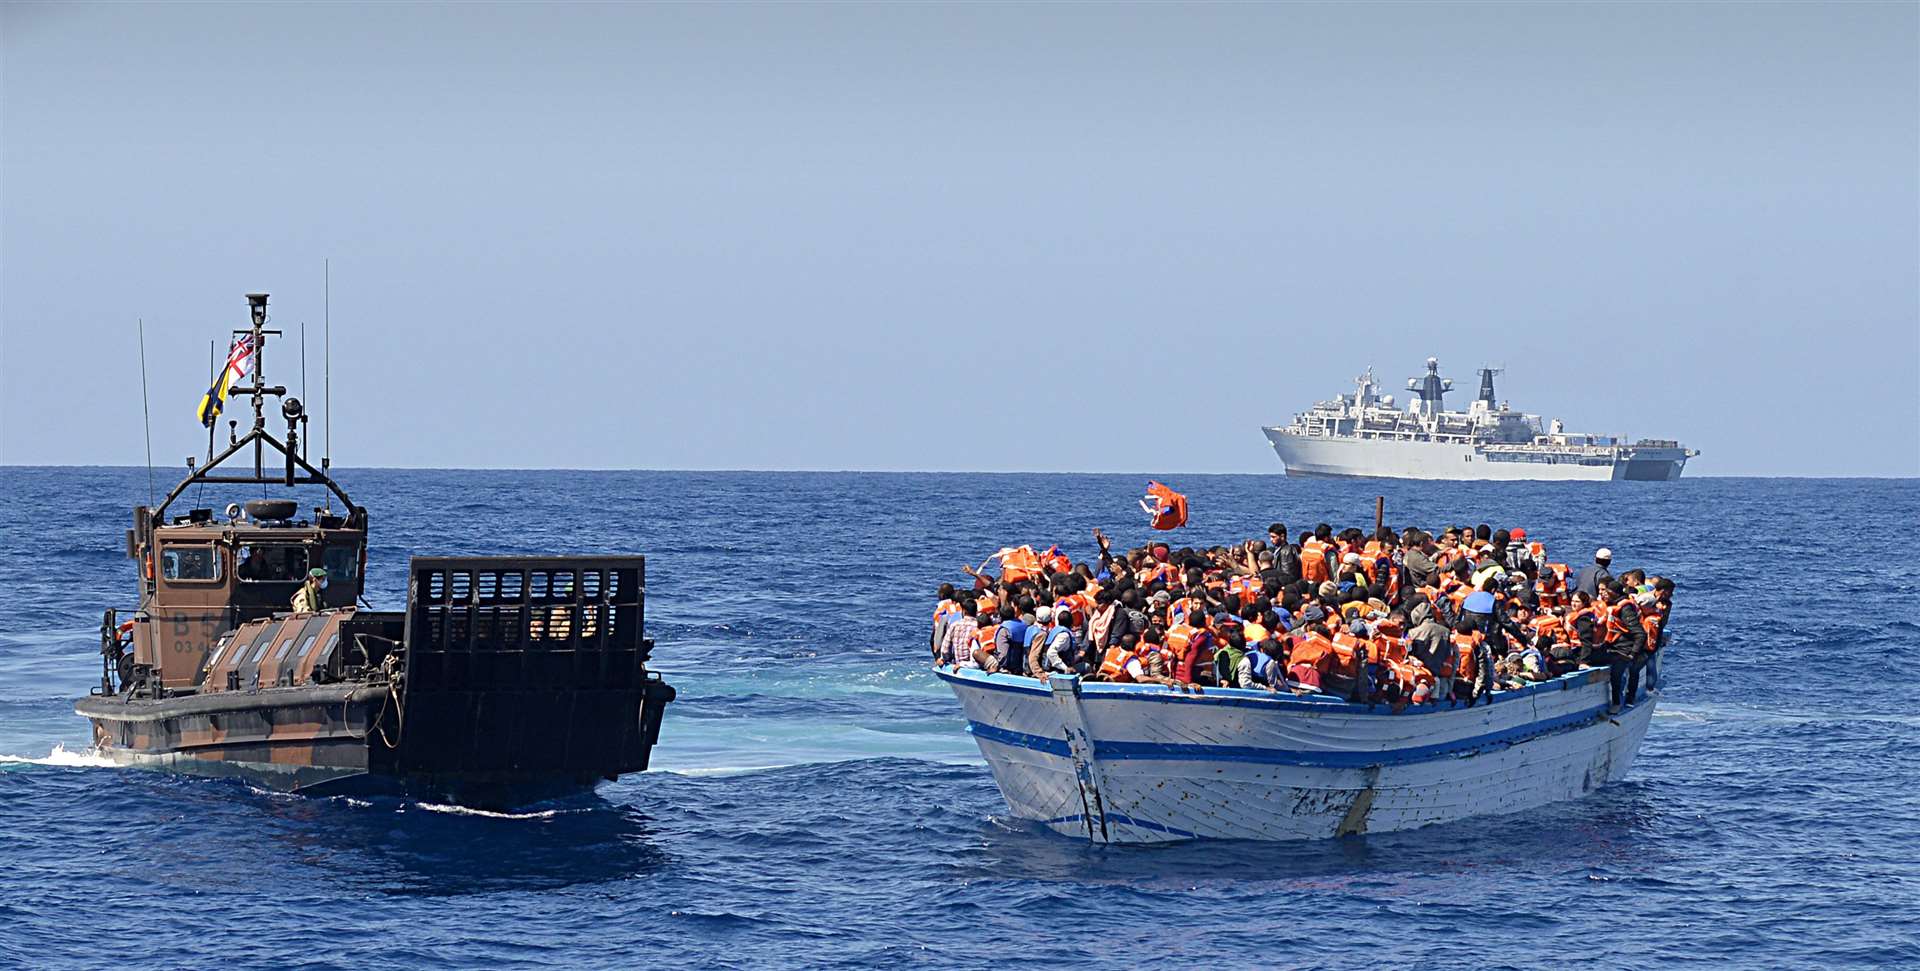 Migrants crammed into a heavily overcrowded wooden boat off the coast of Libya (MoD/PA)